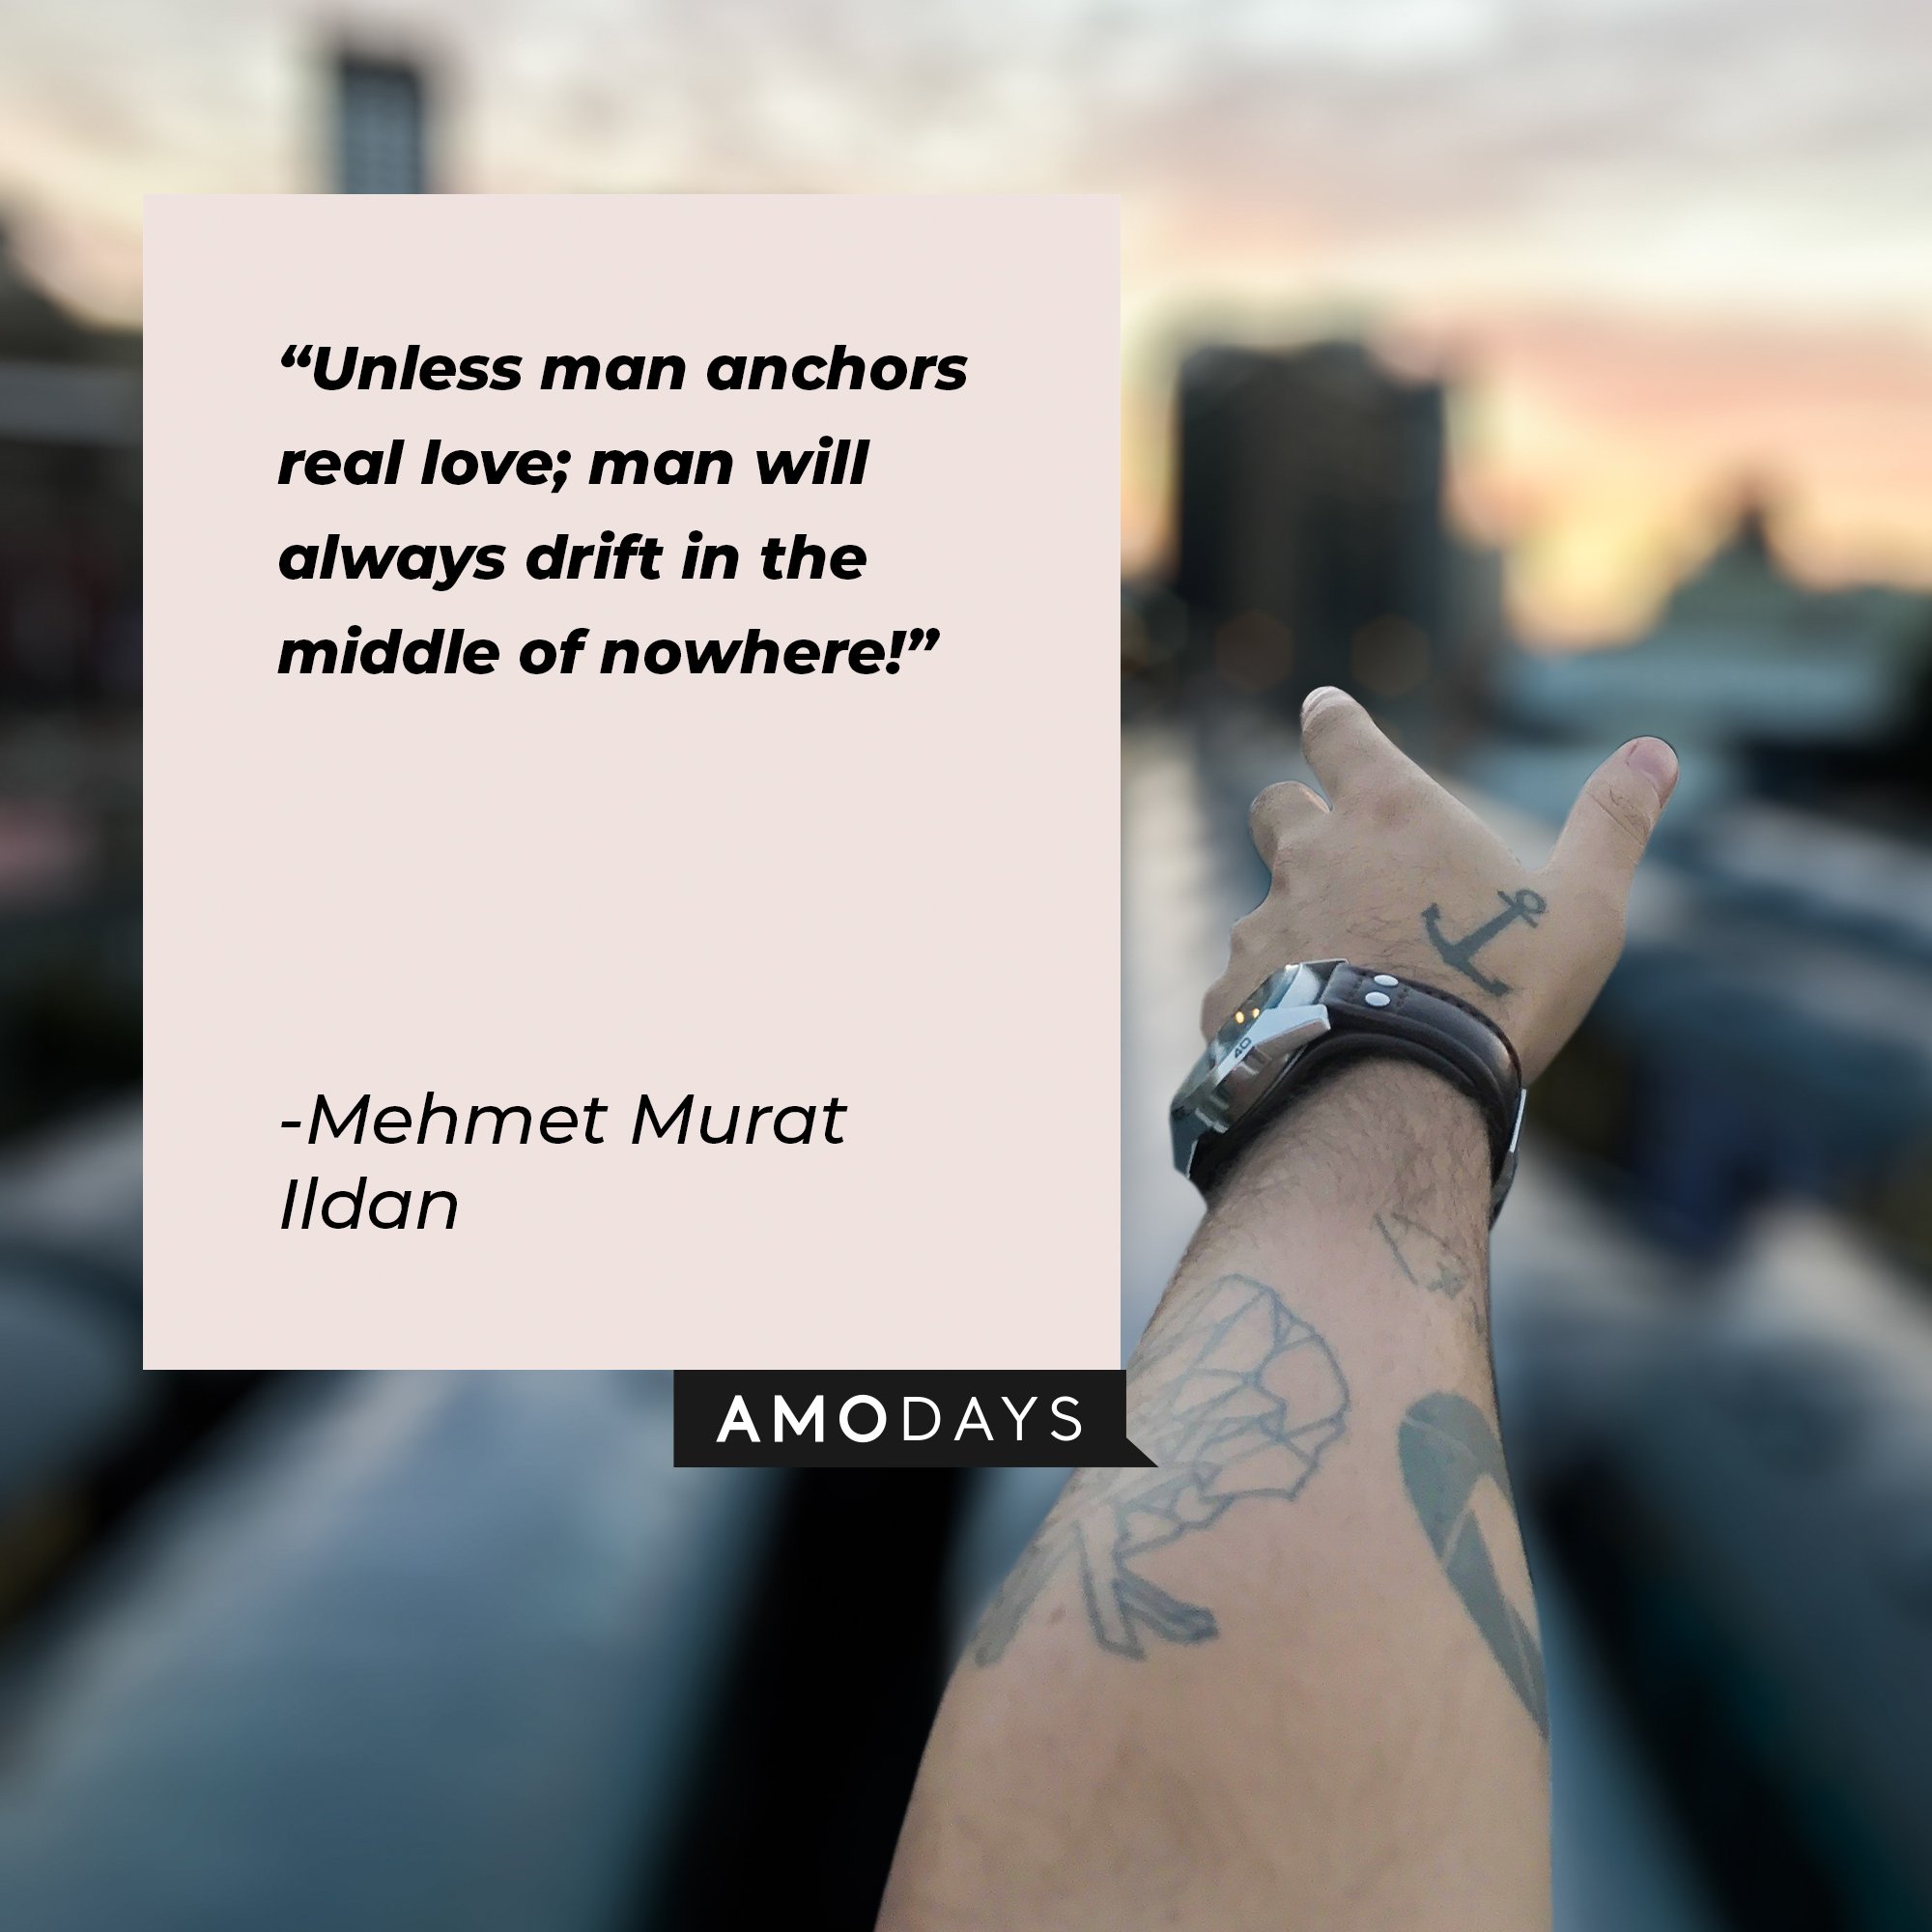 Mehmet Murat Ildan's quote: "Unless man anchors real life, man will always drift in the middle of nowhere!" | Image: AmoDays